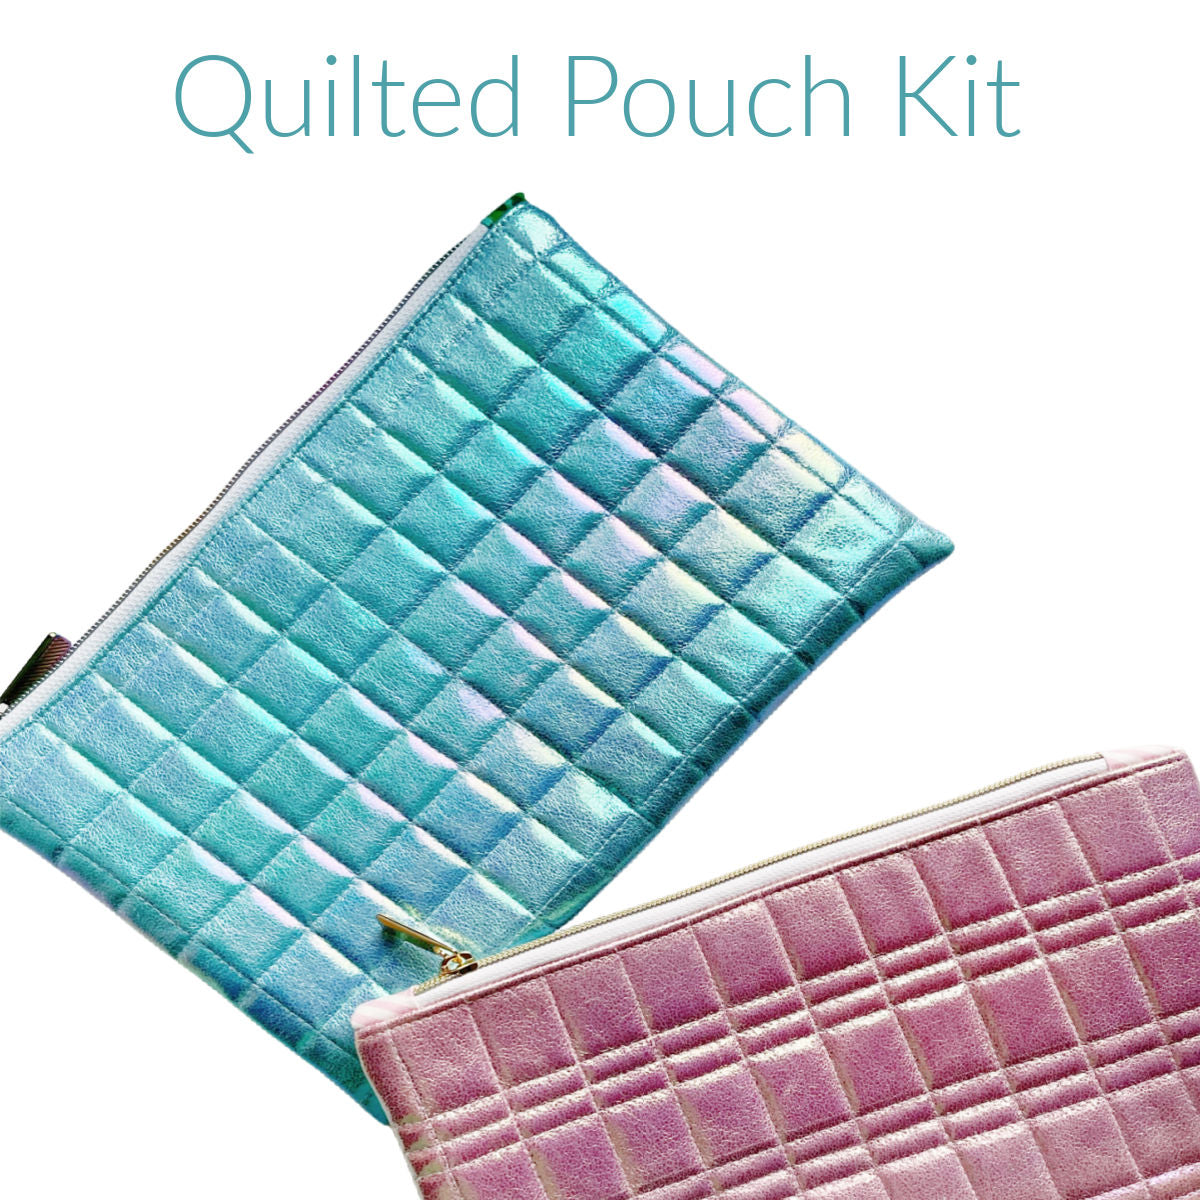 Quilted Pouch Kit Sea Foam or Cotton Candy